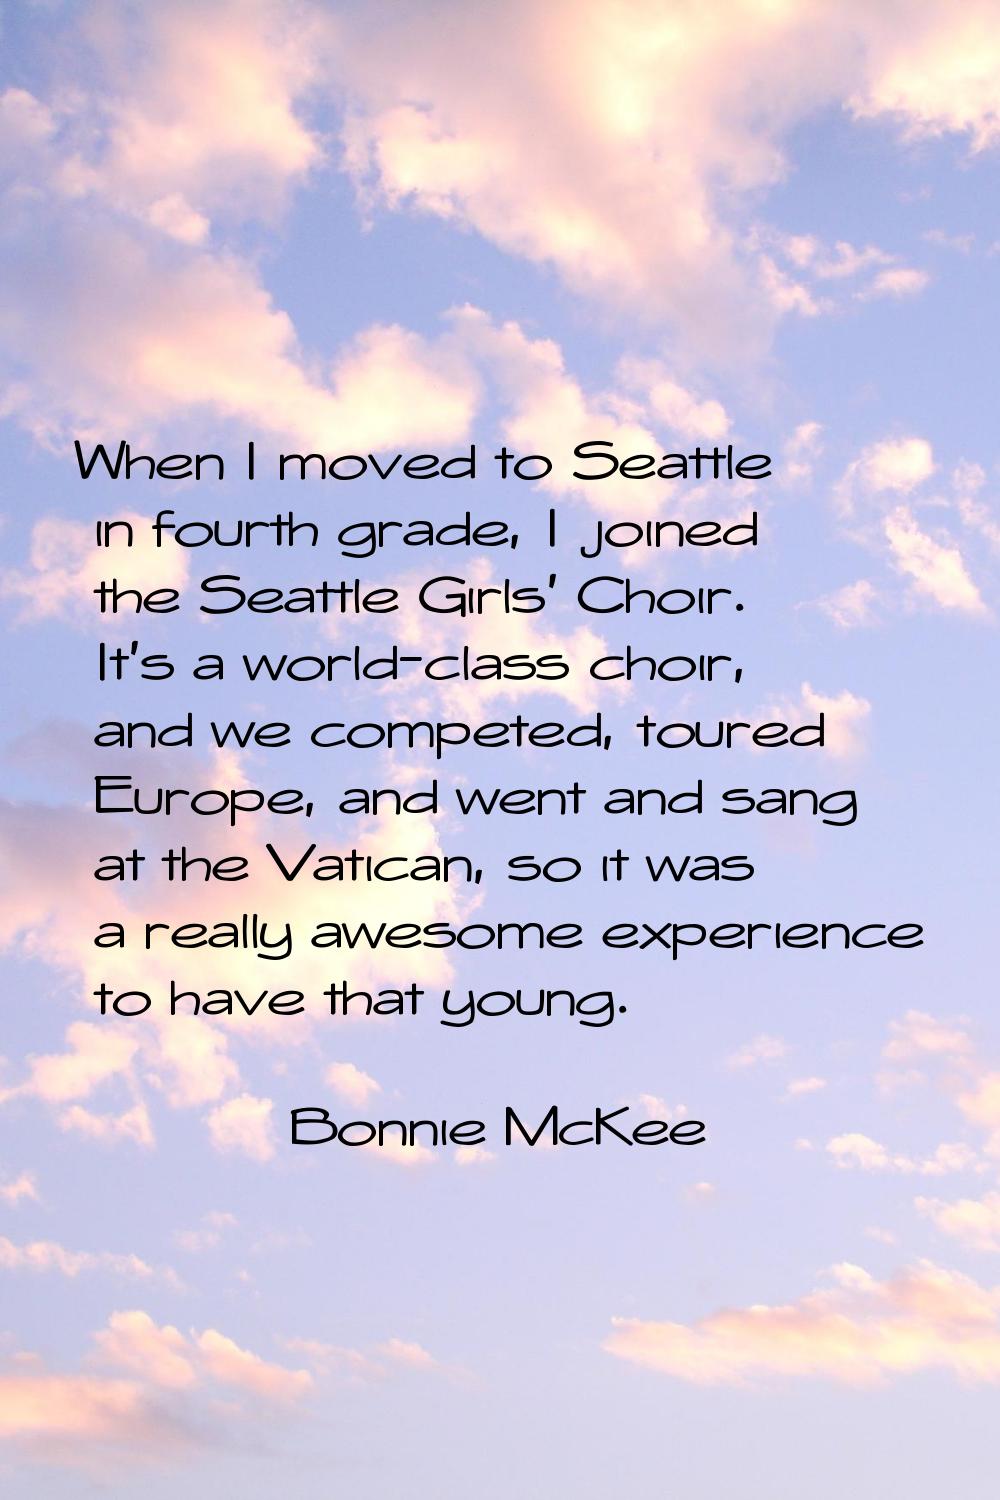 When I moved to Seattle in fourth grade, I joined the Seattle Girls' Choir. It's a world-class choi